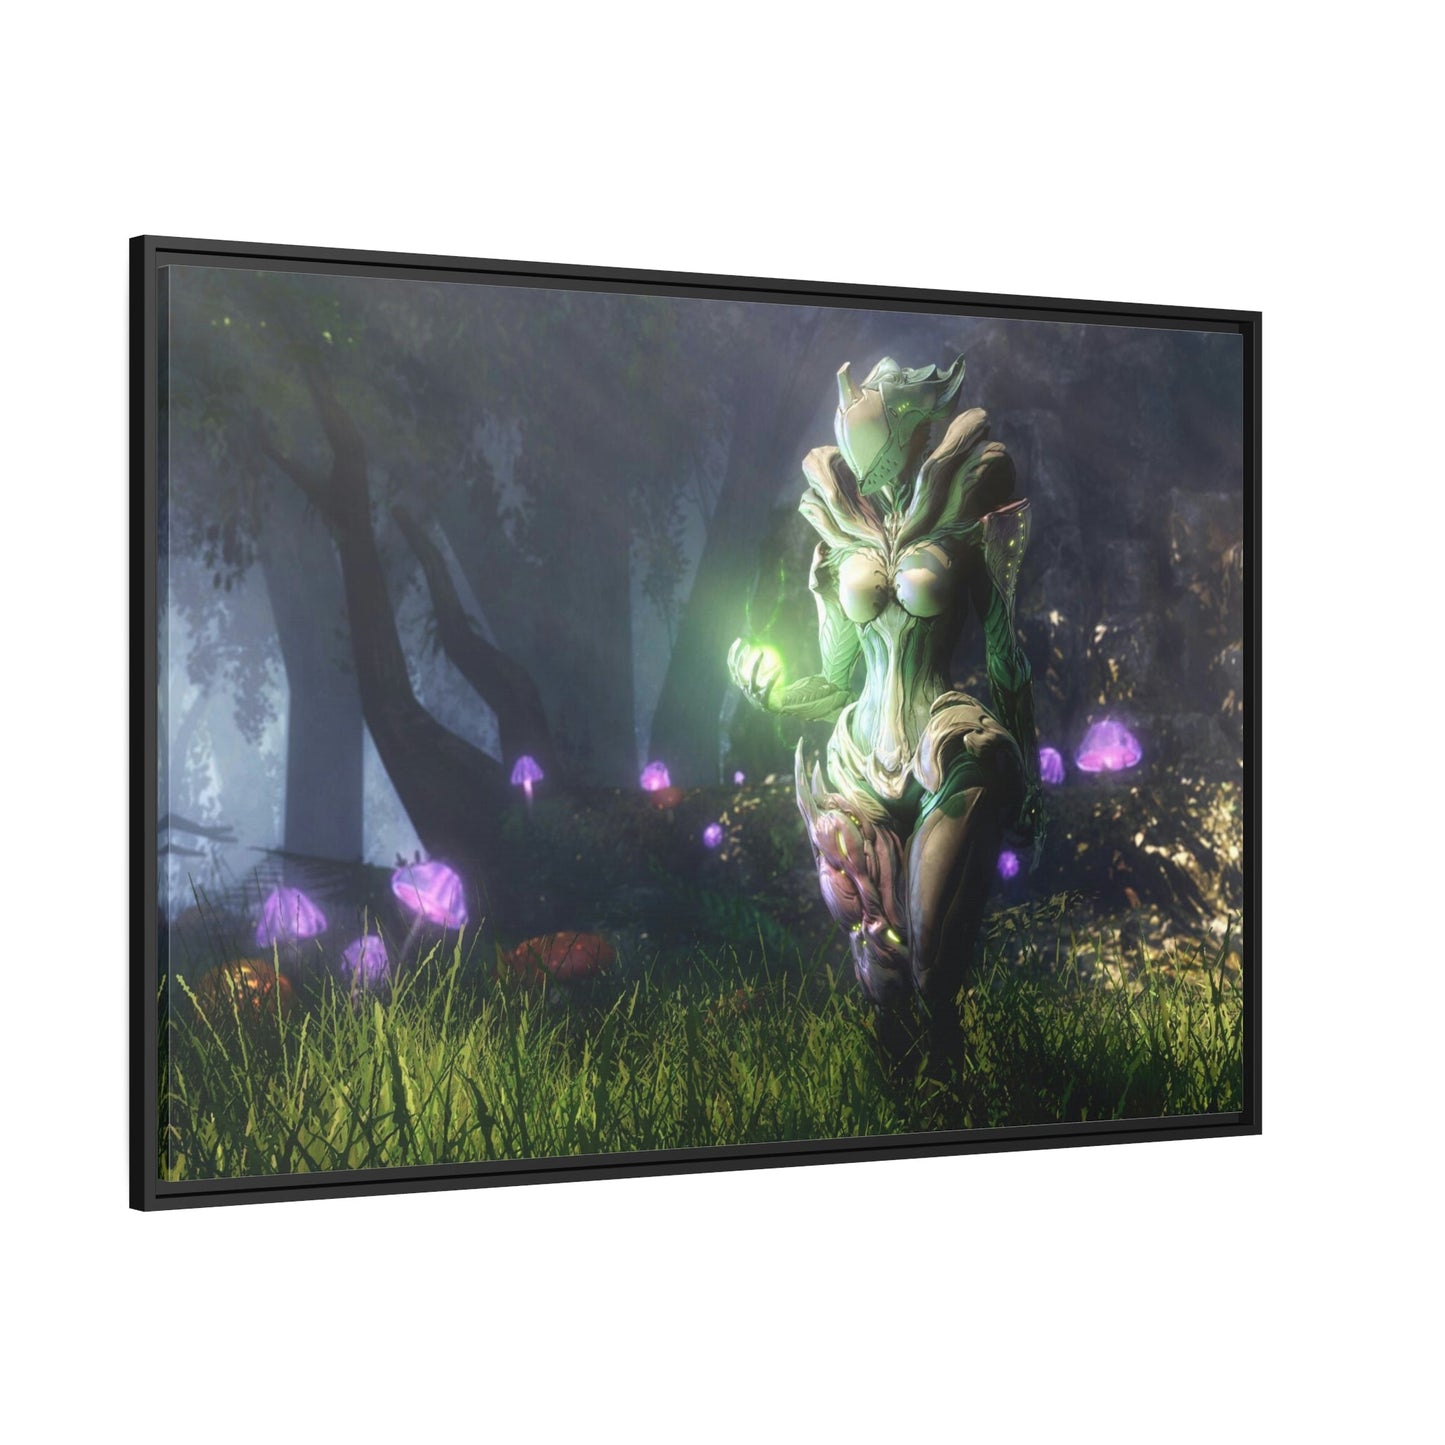 The Art of Warframe: Poster and Canvas Prints of the Game's Stunning Artwork